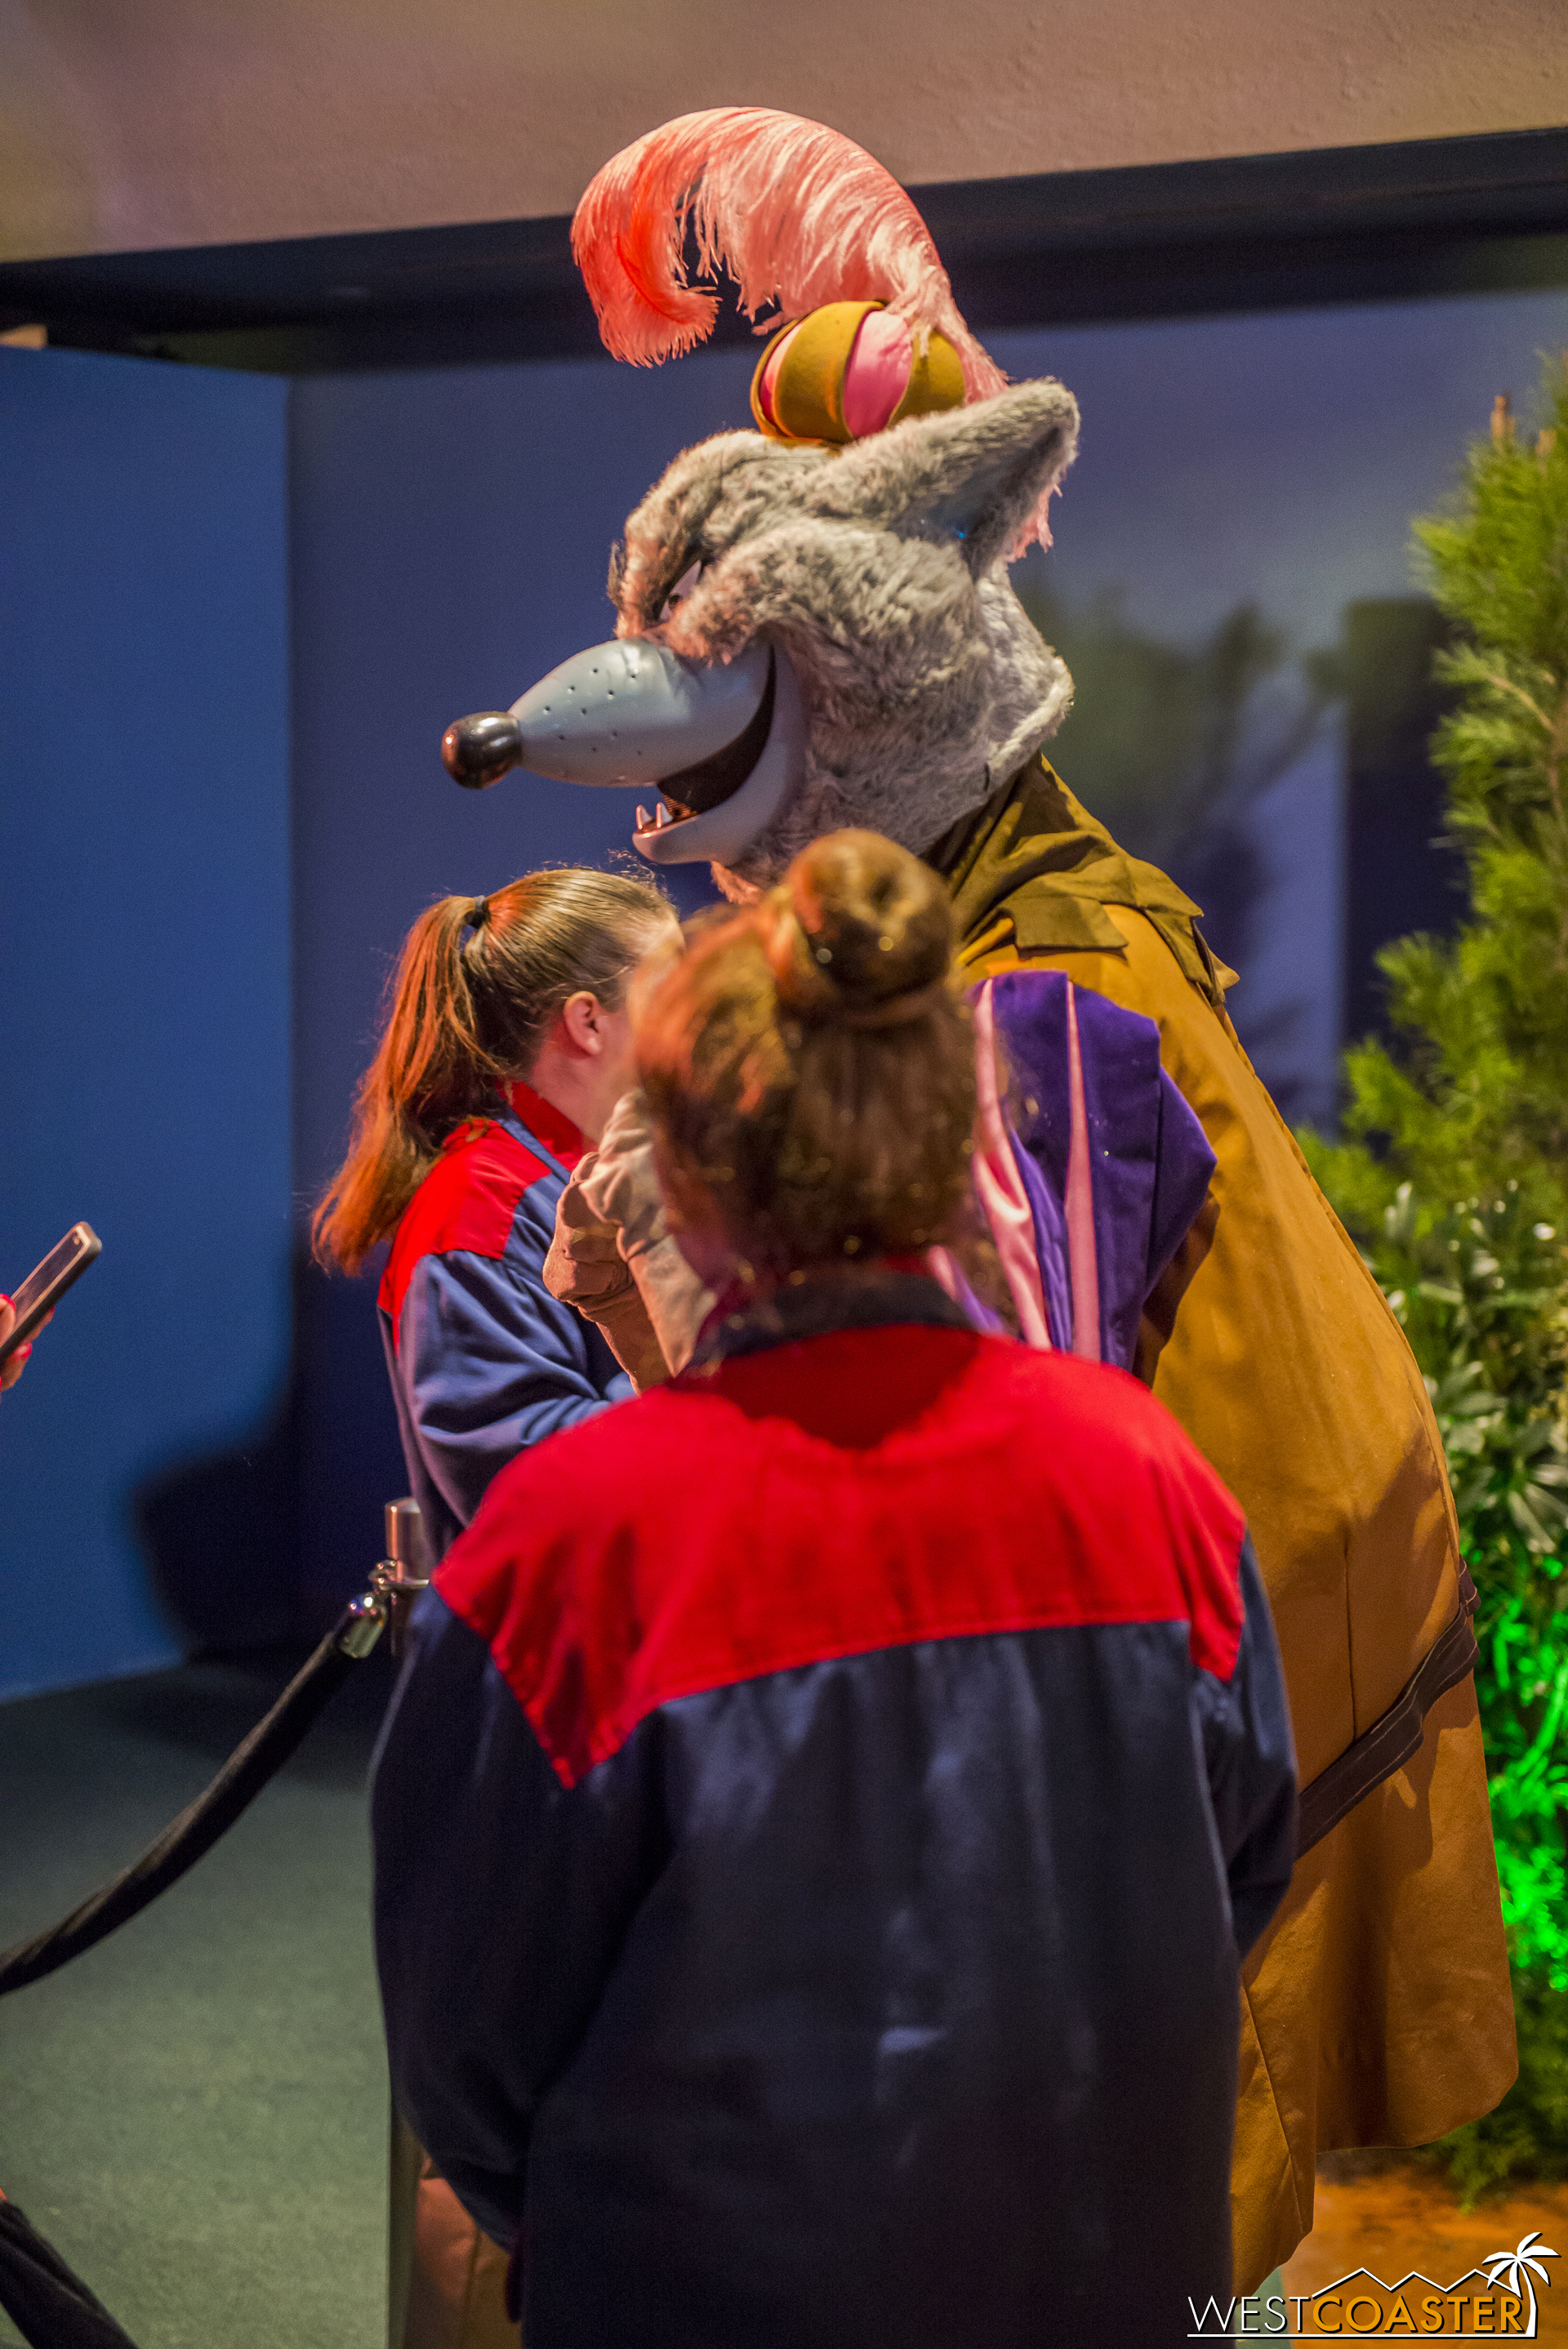  The most popular feature of this Welcome Center appeared to be the meet-and-greet with the Sheriff of Nottingham and Prince John from Disney's  Robin Hood . 